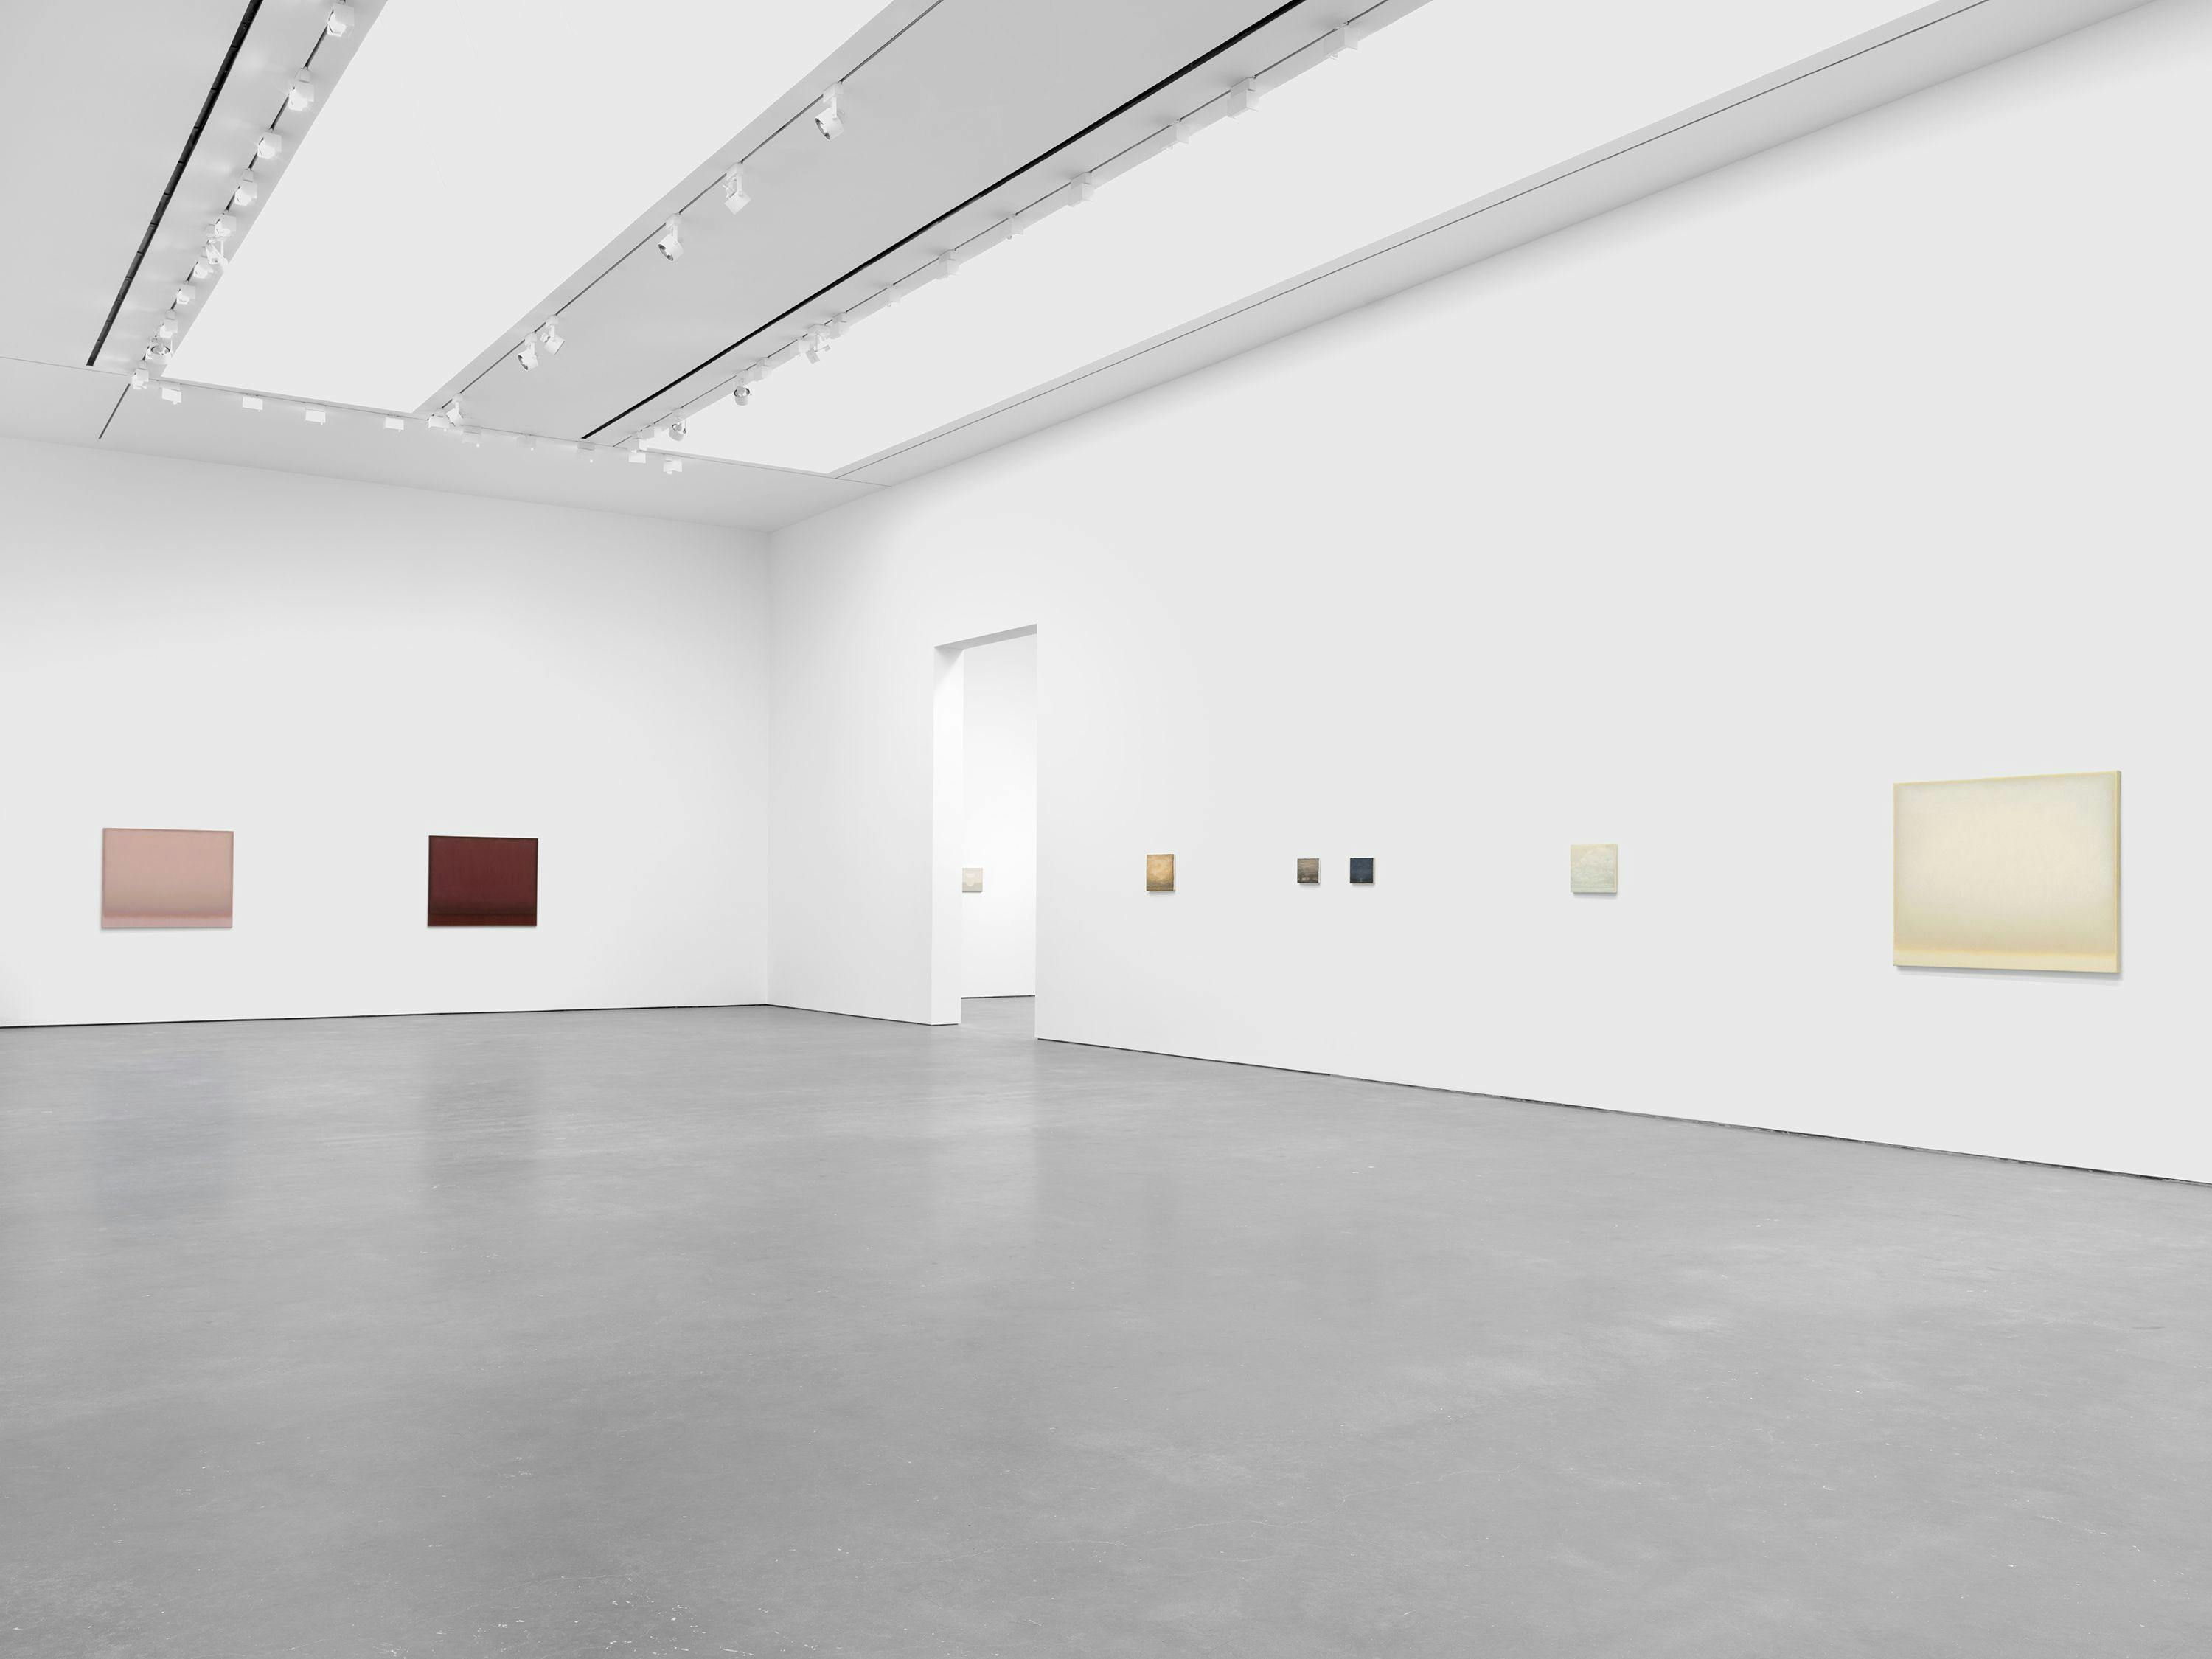 An installation view of paintings by Lucas Arruda at David Zwirner in New York